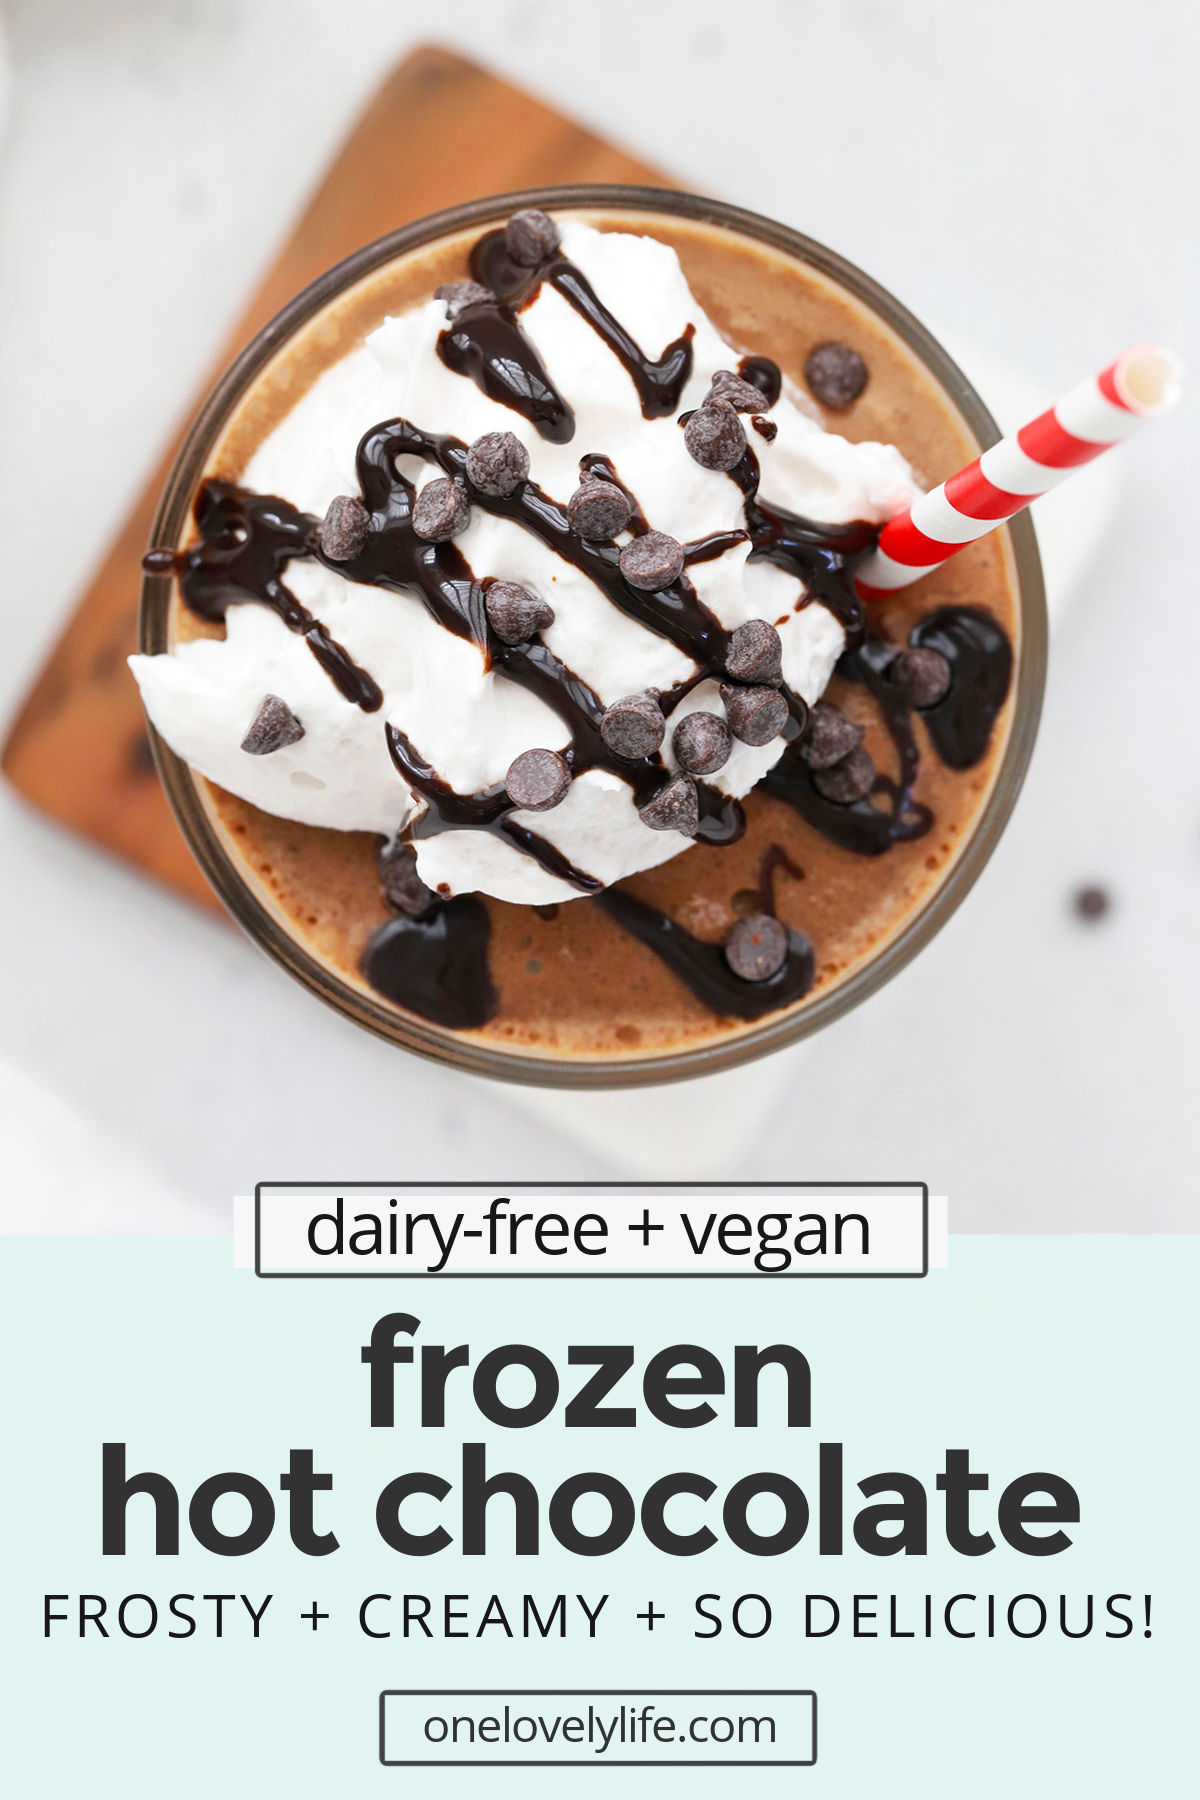 Vegan Frozen Hot Chocolate - This dairy-free frozen hot chocolate is frost, creamy, and so delicious with a swirl of whipped cream and some chocolate on top. You won't want to miss it! // Paleo Frozen Hot Chocolate // Healthy Frozen Hot Chocolate recipe // easy frozen hot chocolate // vegan serendipity frozen hot chocolate // homemade frozen hot chocolate